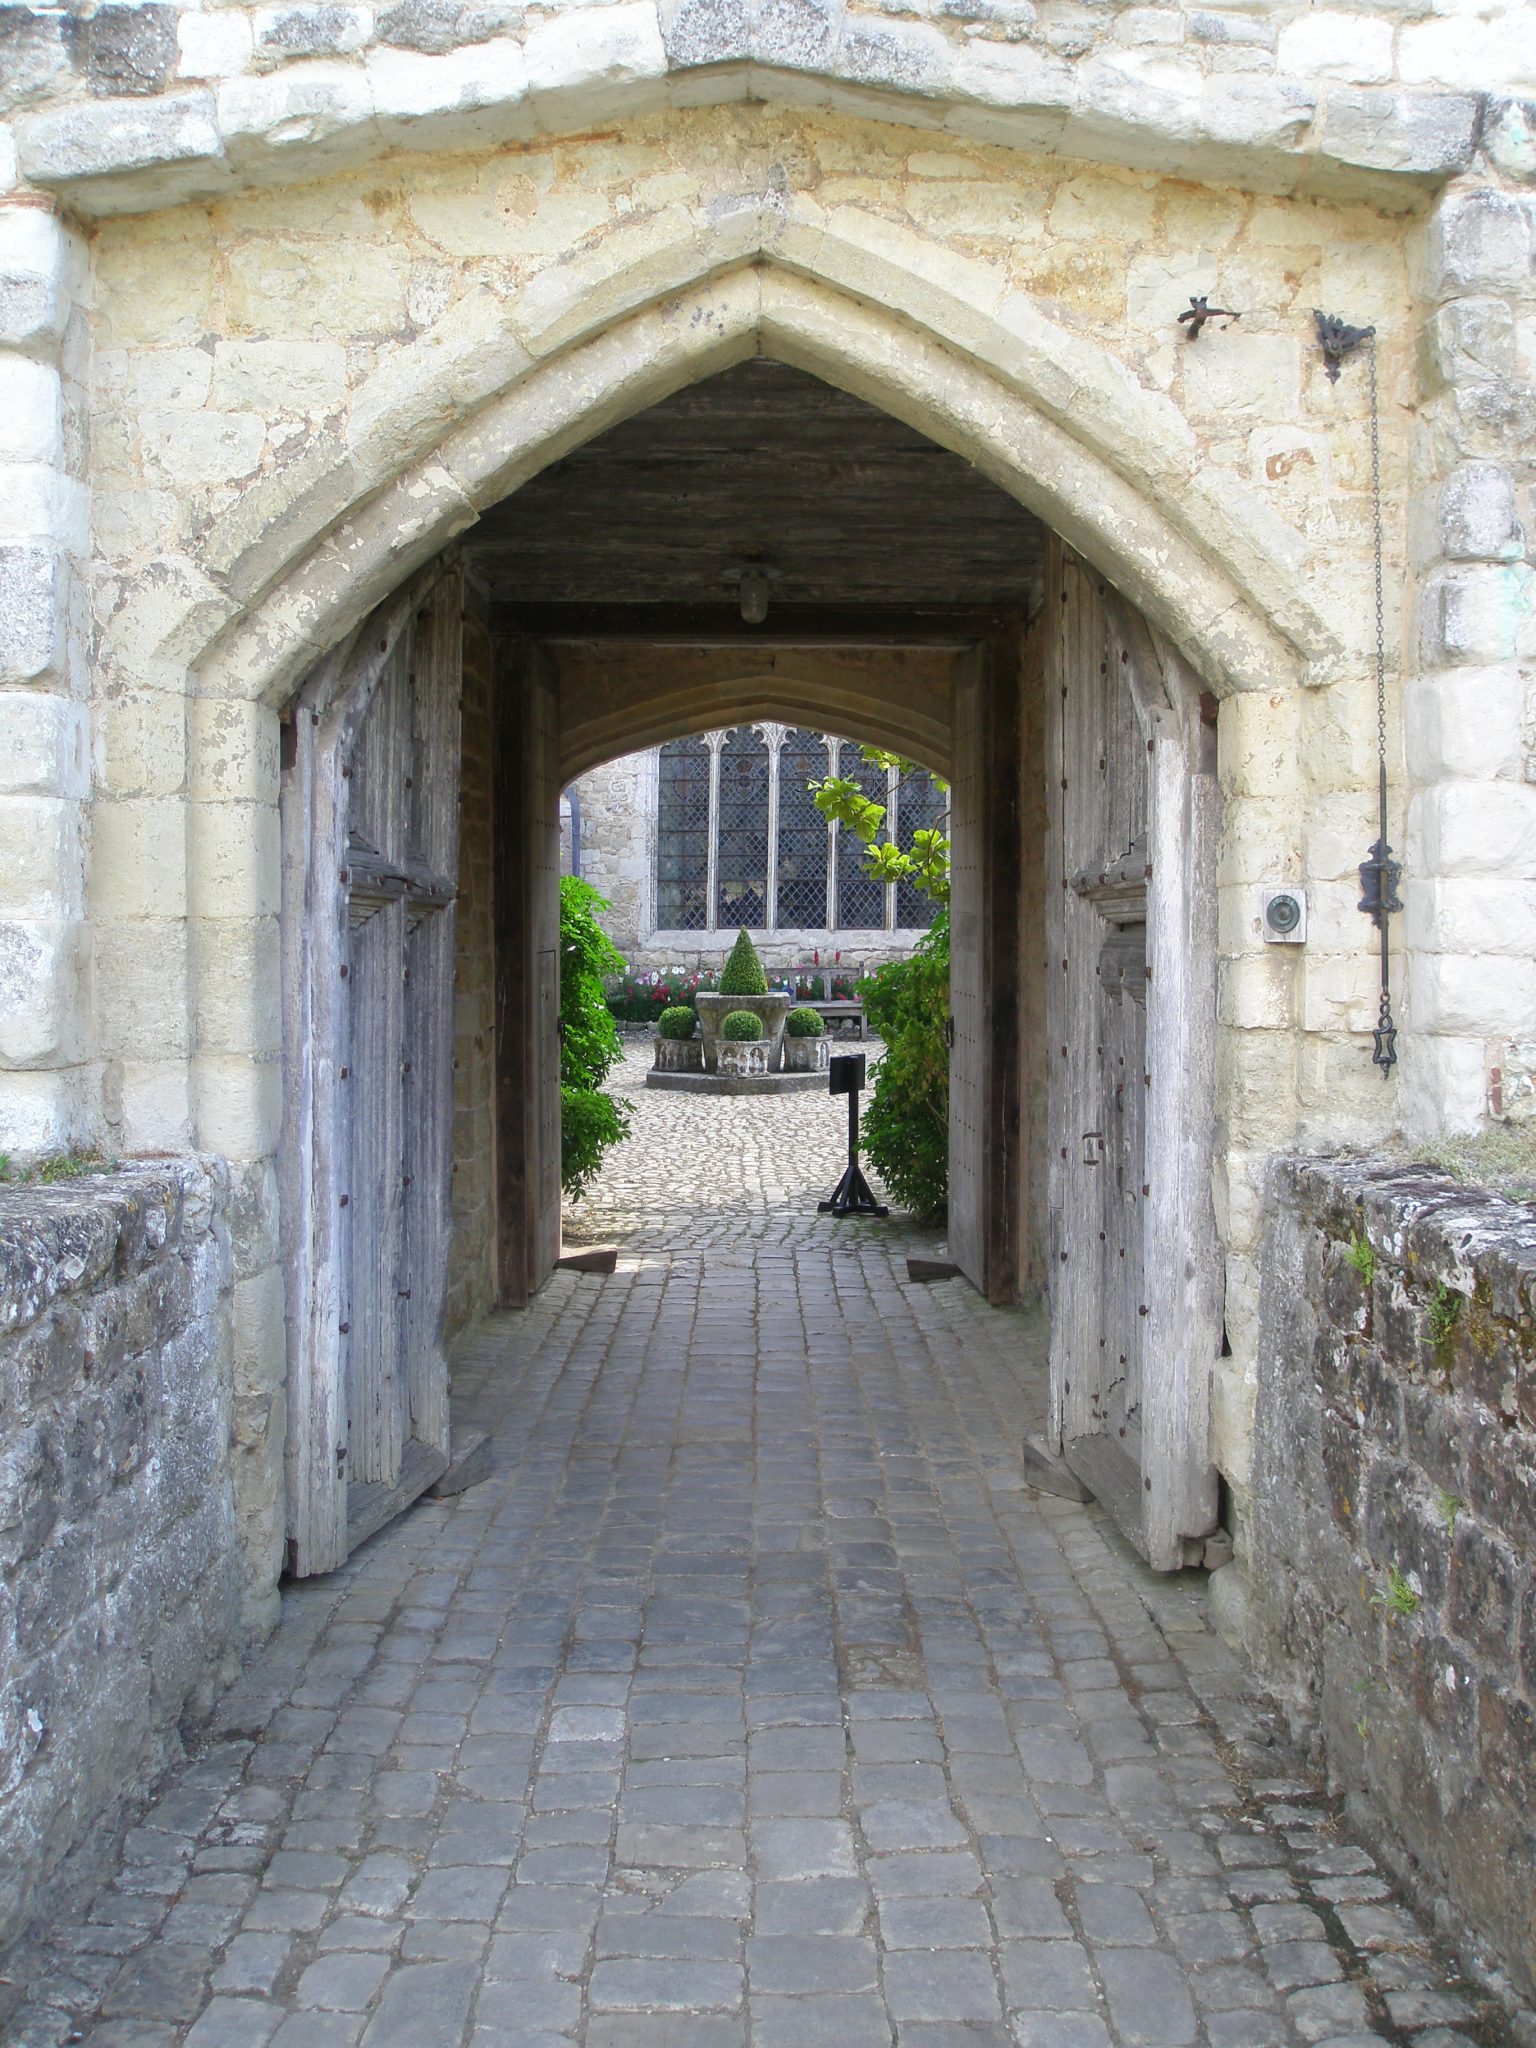 Entry tunnel to the Courtyard, from the Gatehouse Tower Bridge